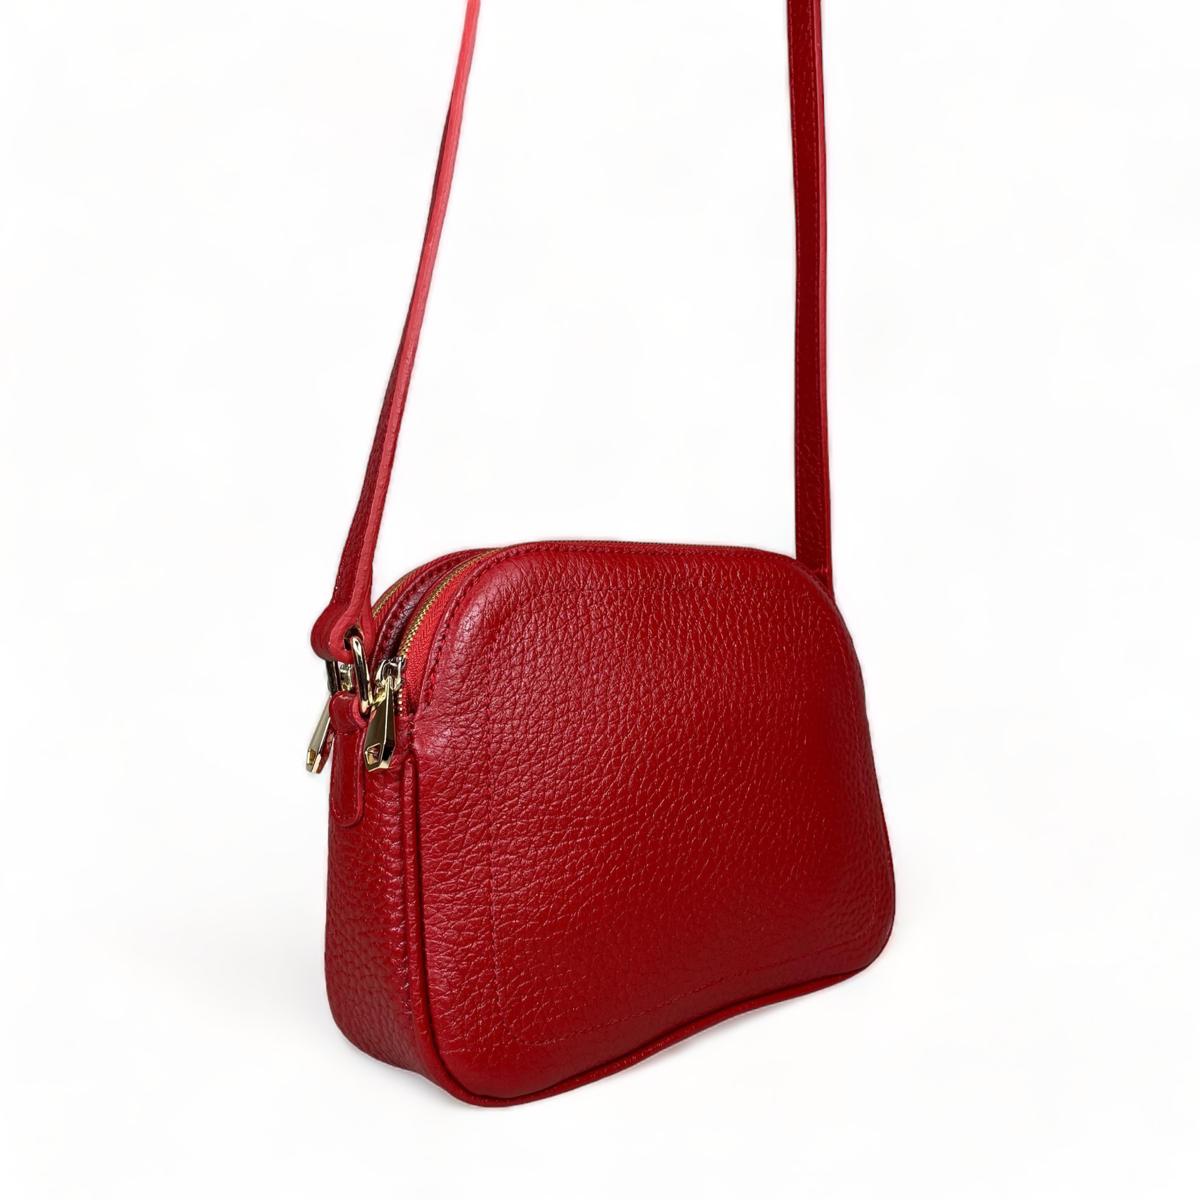 LeatherLuxe - Red Leather Women's Shoulder Bag; Crossbody Genuine leather Designer Premium leather bag for women leather hobo tote messenger bag Leather Accessories Leather Shop Leather Goods